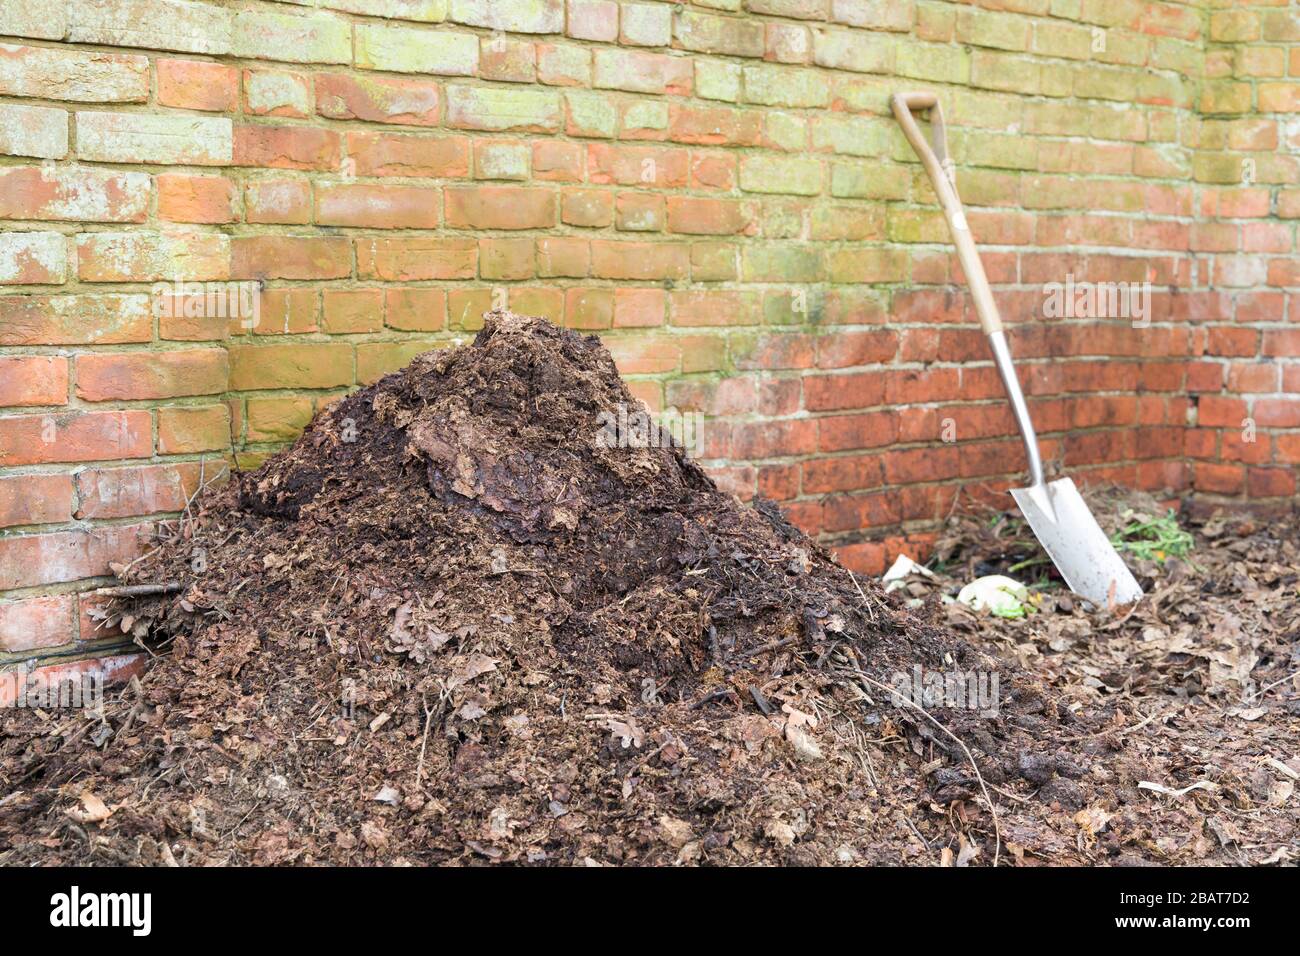 Homemade garden compost heap with leaf mould for use as a mulch or organic fertilizer, UK Stock Photo